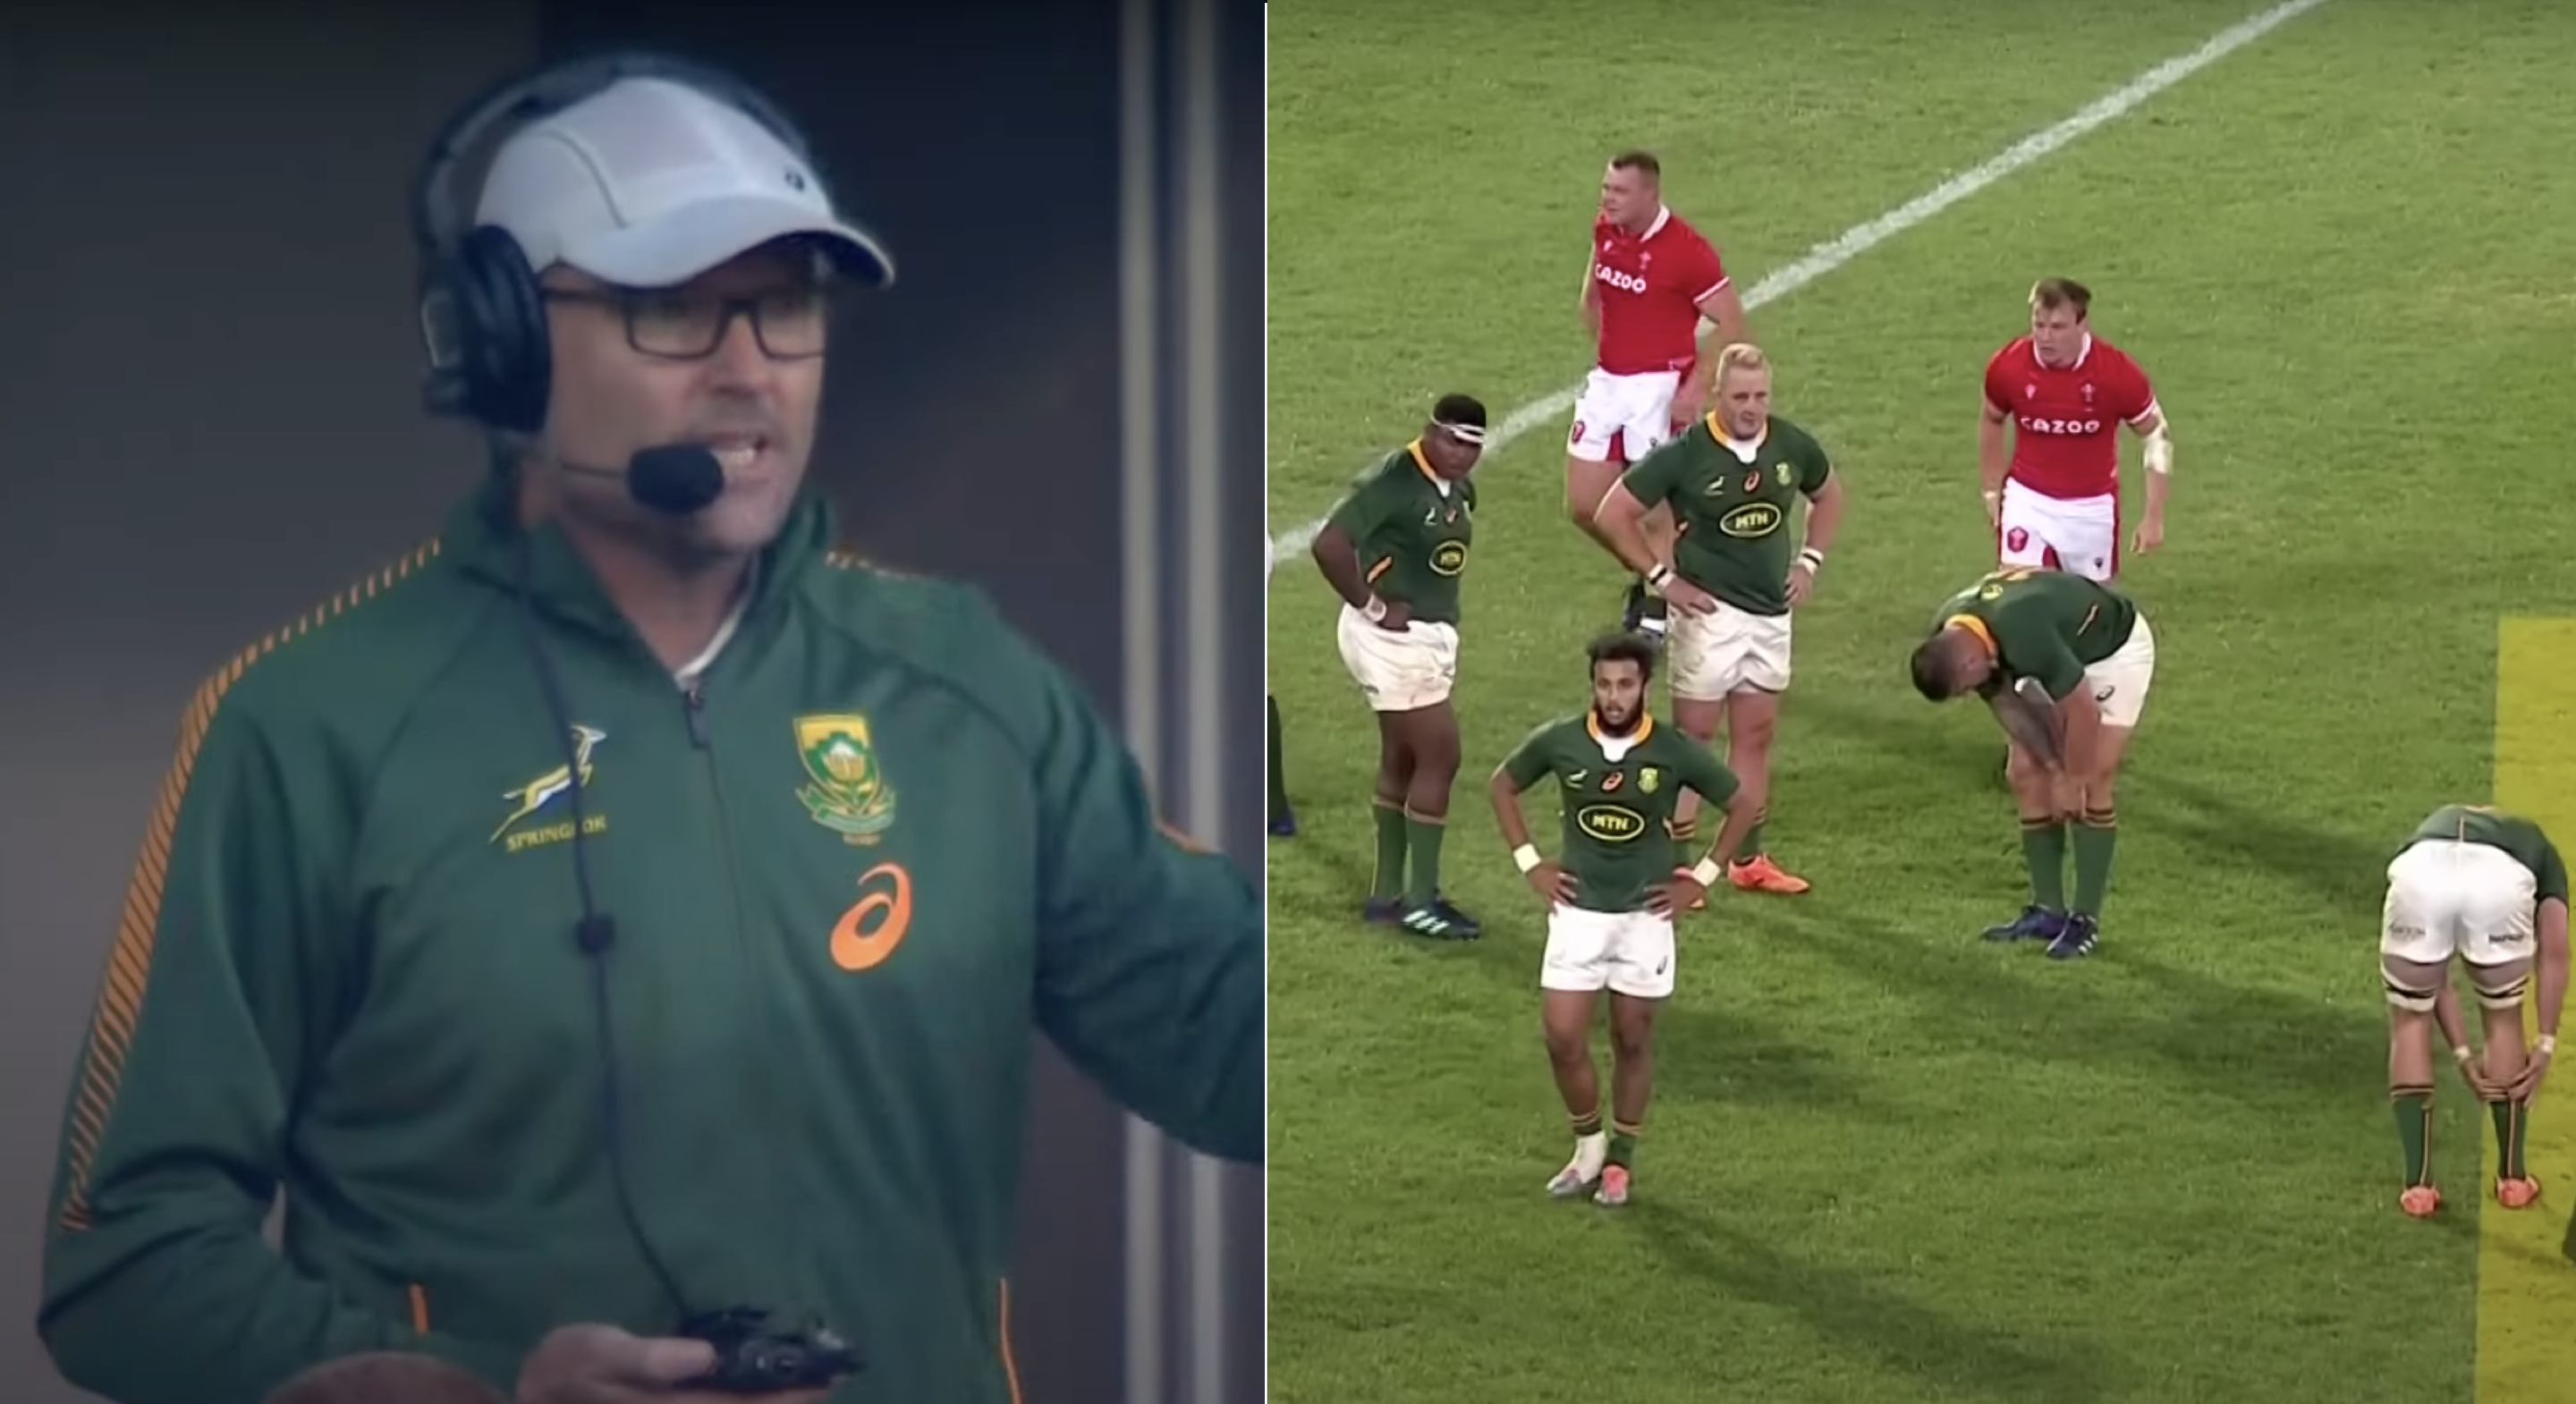 Bok manages to keep his place despite easily droppable display of insolence